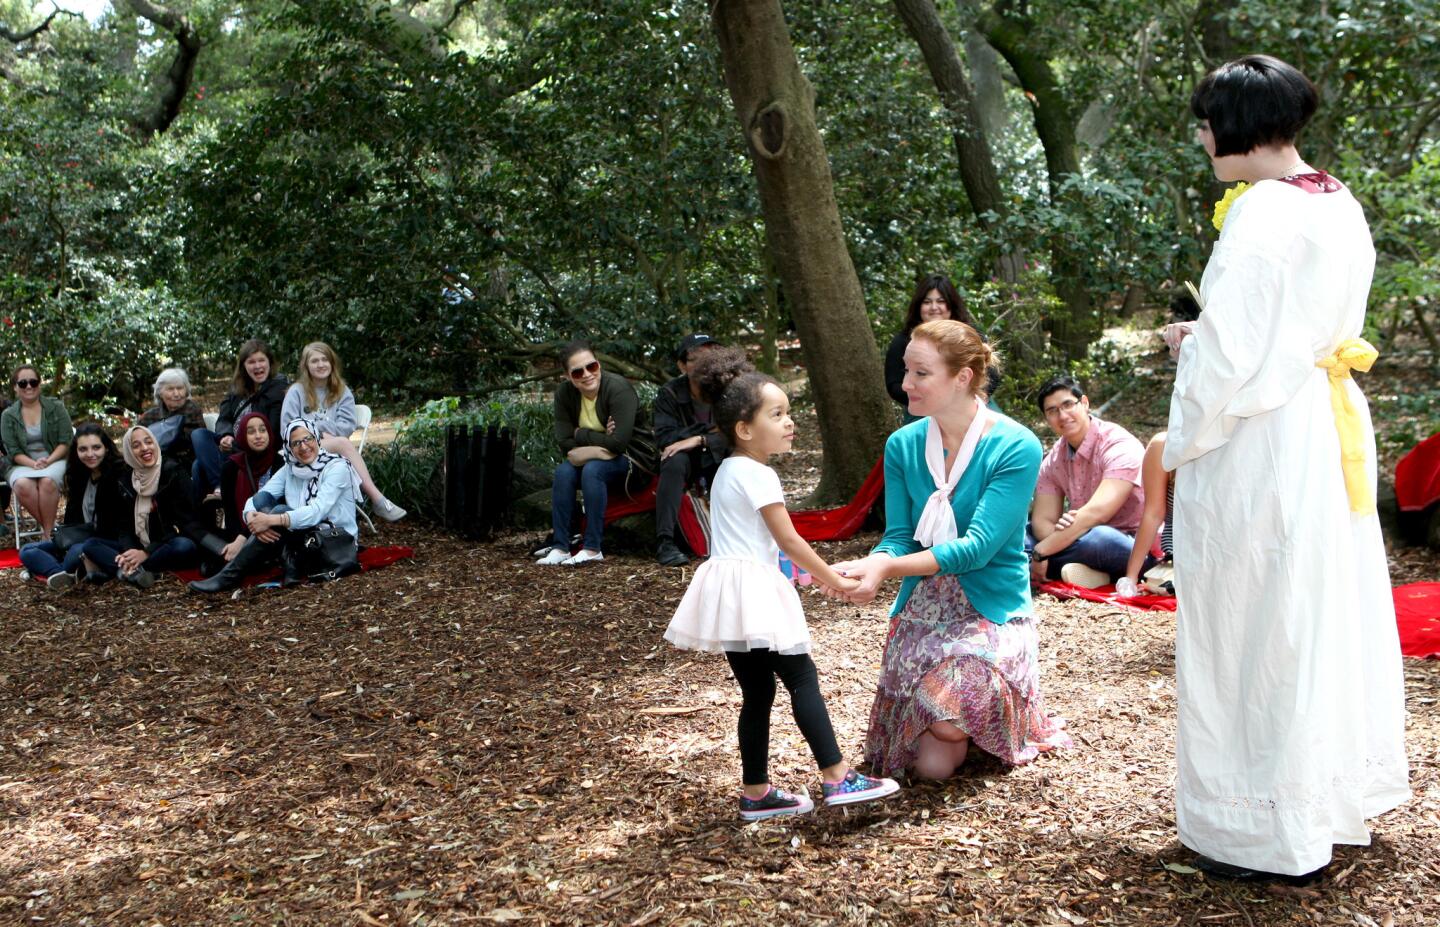 Ensemble Shakespeare Theater actor Megan Pyle, center, holds Amila Monkewitz's hand while actor Anastasia Leddick, right, performs a Shakespeare sonnet at Descanso Gardens in La Ca–ada Flintridge on Saturday, April 8, 2017.